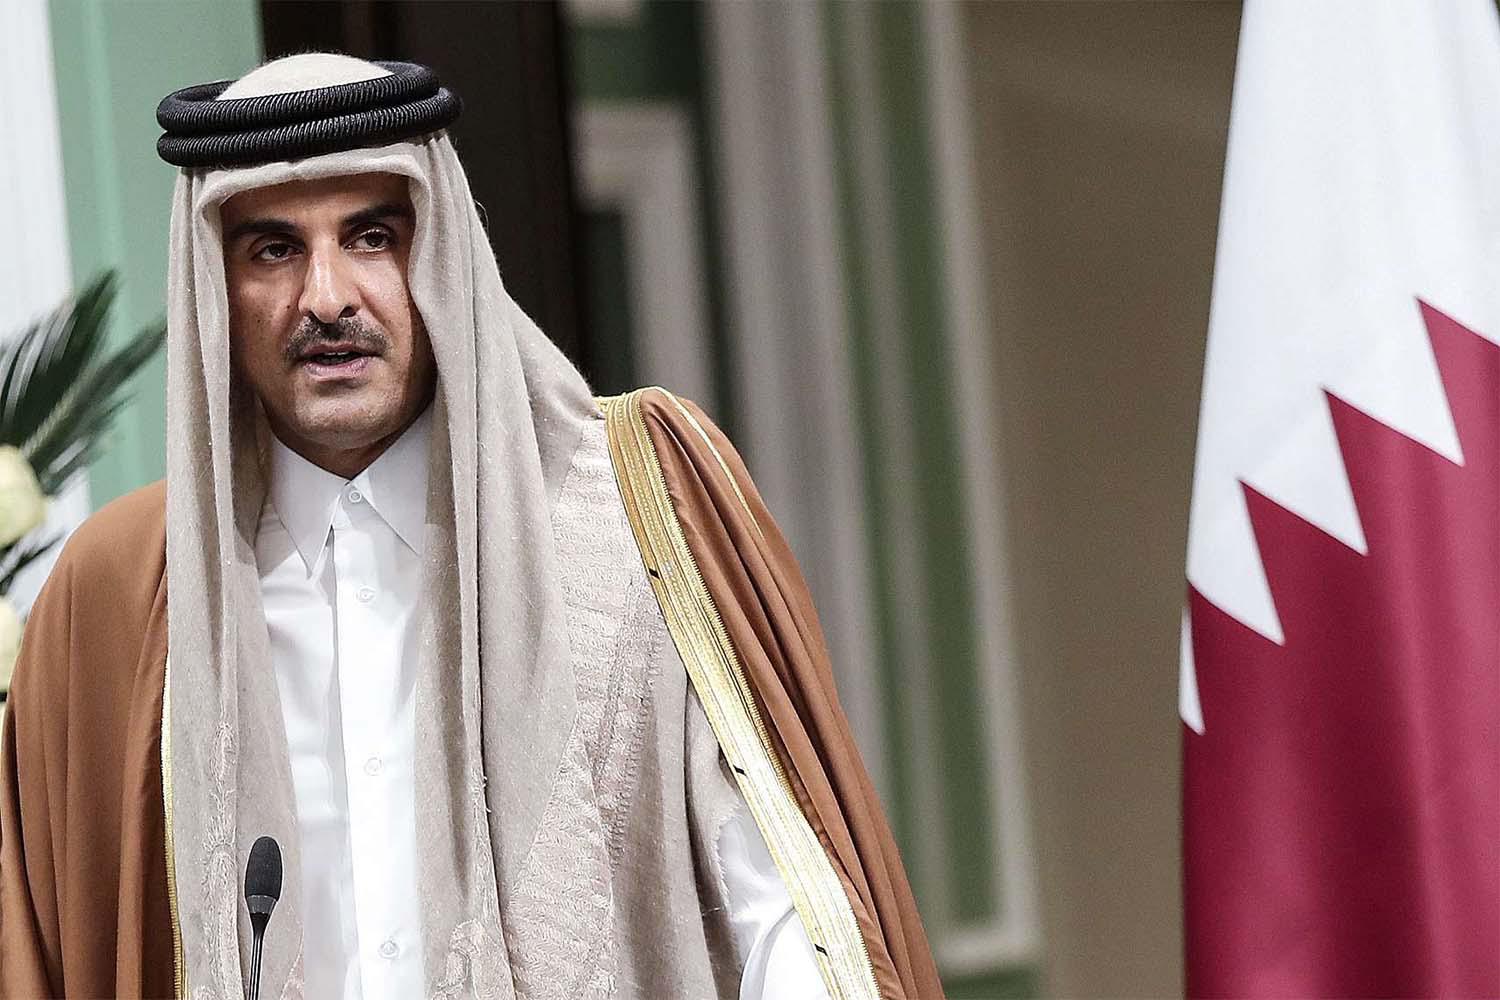 Some members of the Al Murrah tribe have had a fractious relationship with Qatar's ruling family stretching back decades